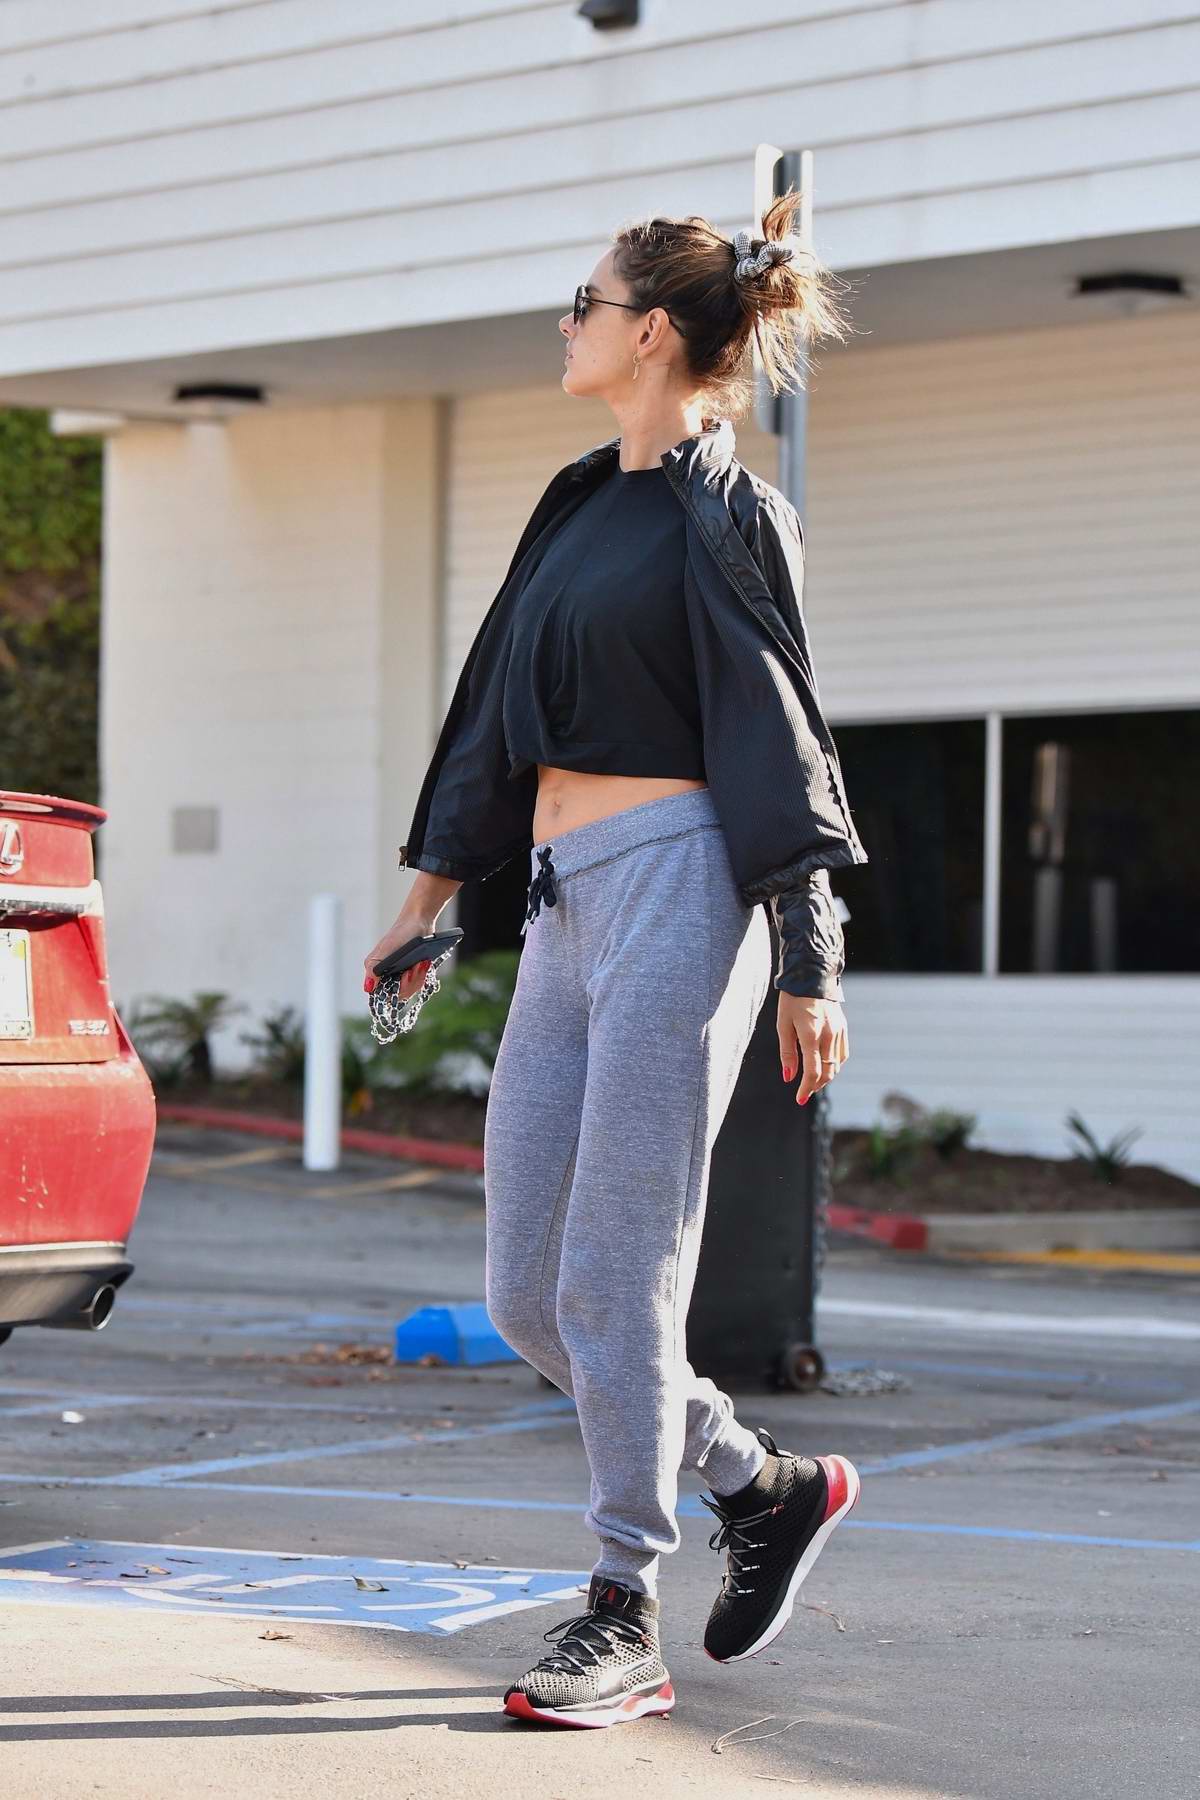 alessandra ambrosio shows off her toned abs in a black crop top while